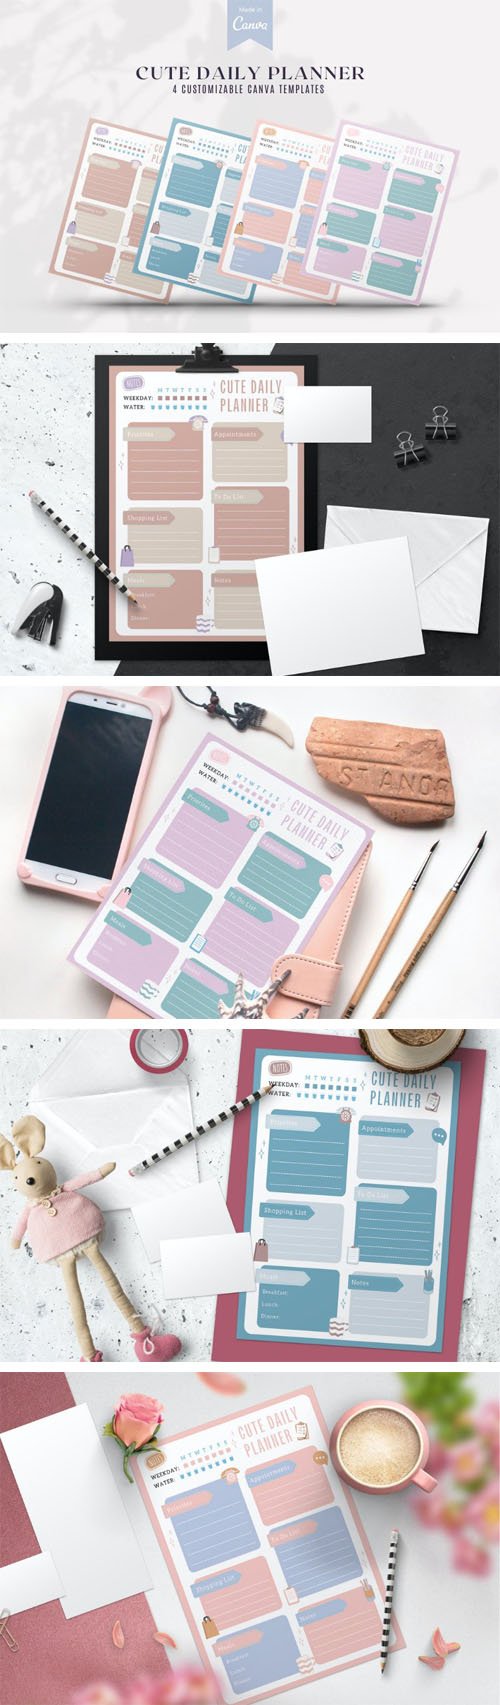 Cute Daily Planner - 4 Customizable Canva PDF Templates